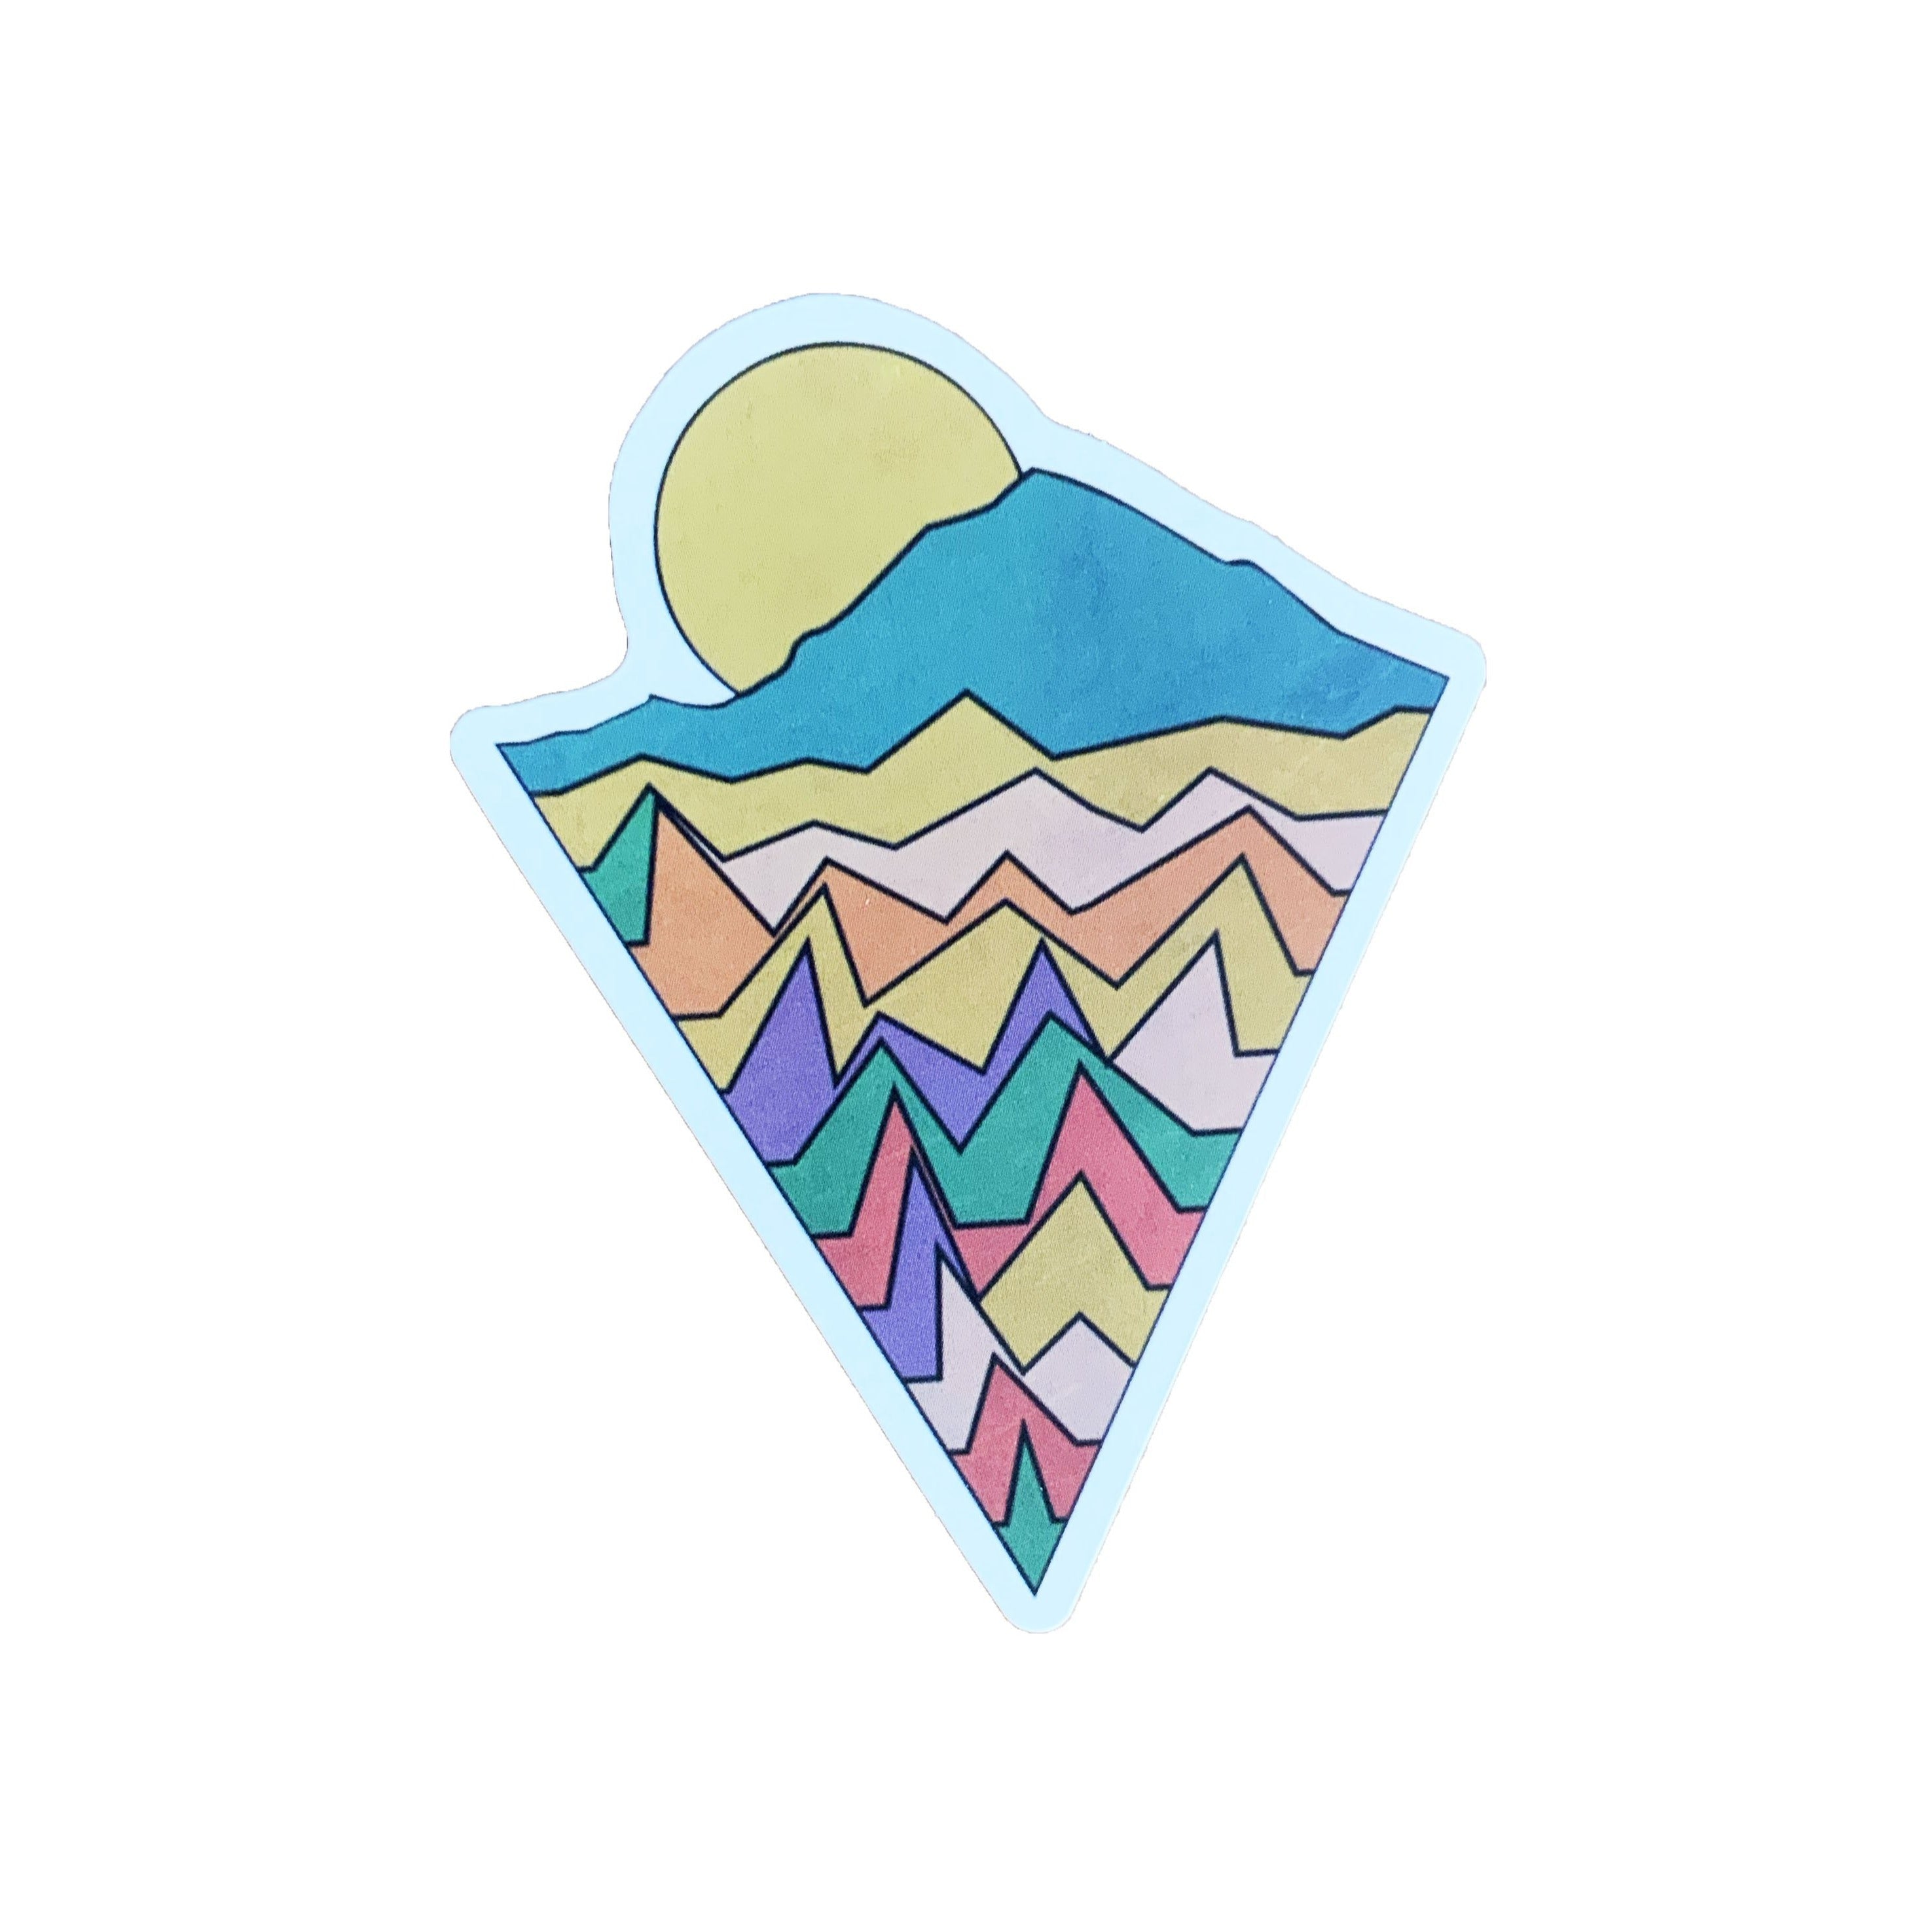 Colorful Mountains Sticker, sticker, Pacific Rayne, Defiance Outdoor Gear Co.